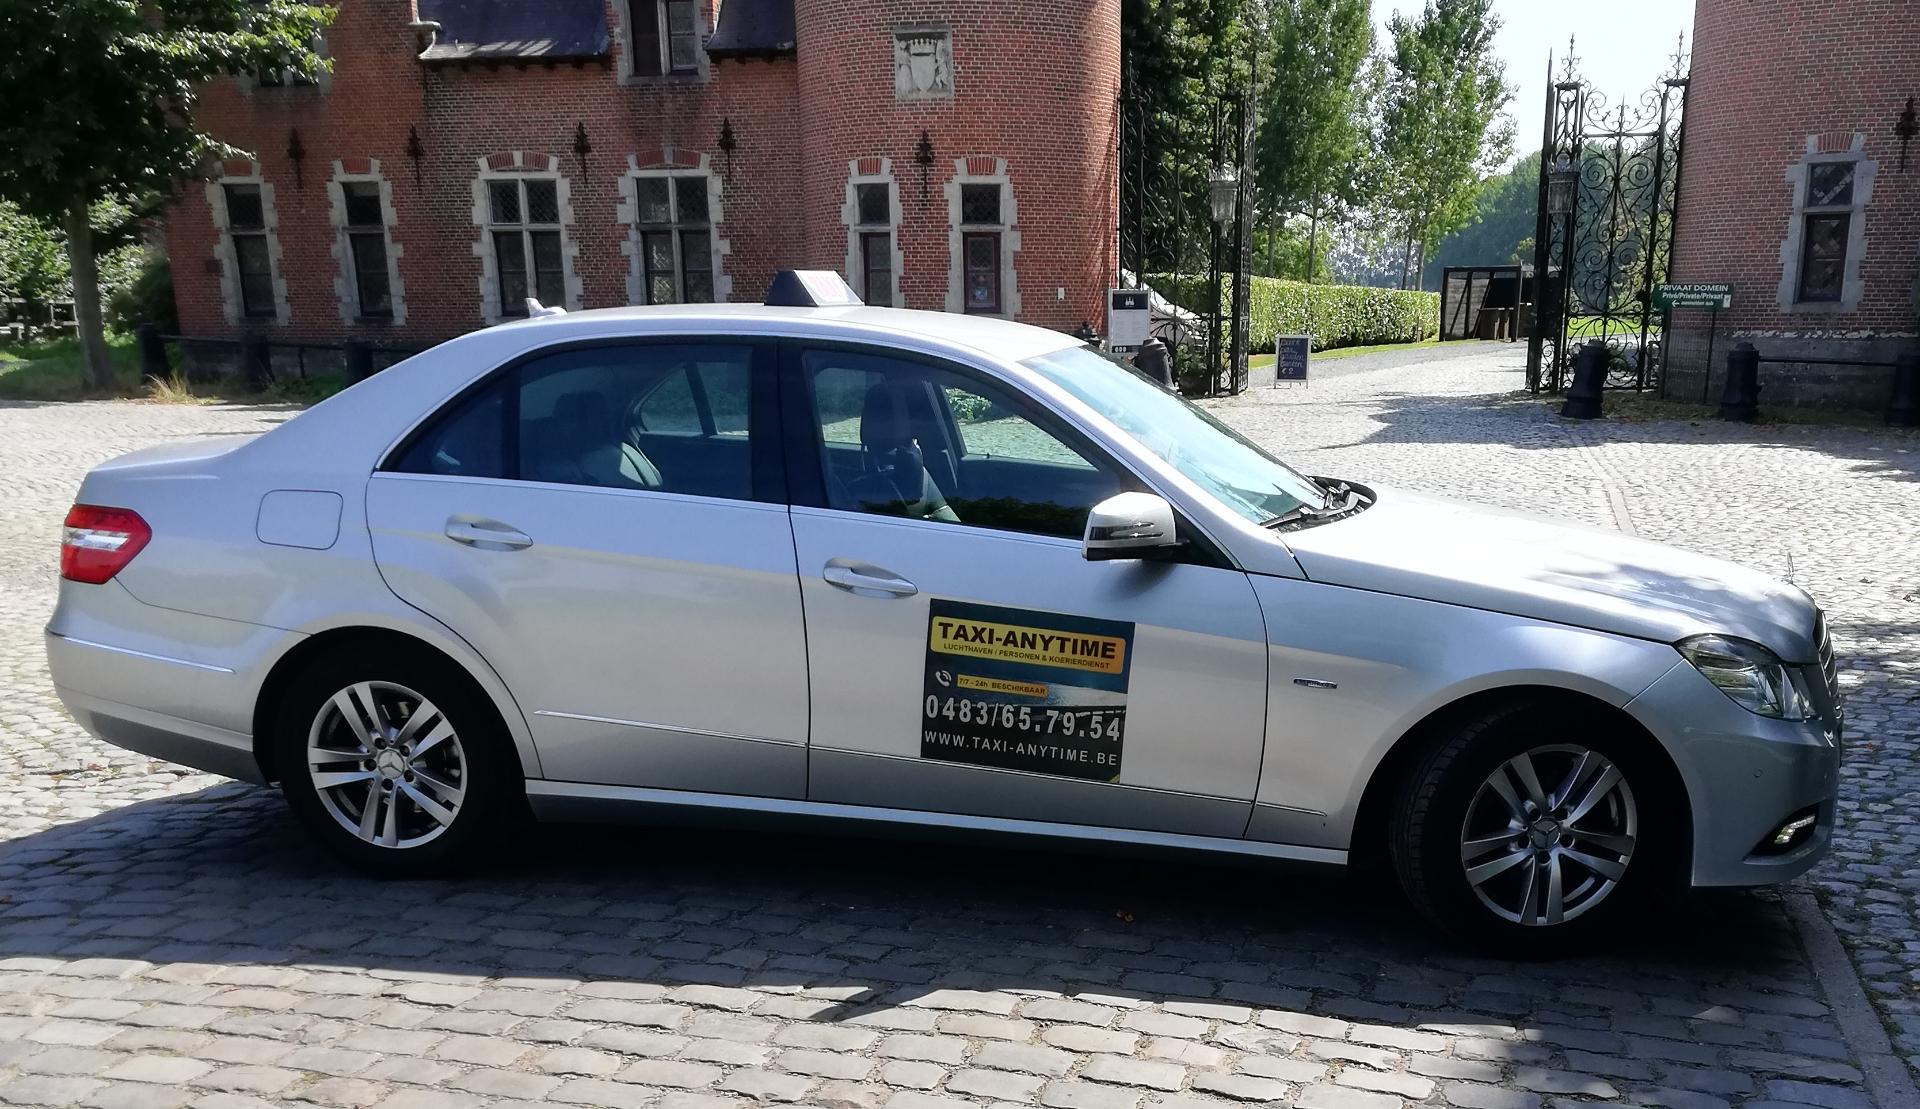 luxe-autoverhuurders Putte Taxi-Anytime